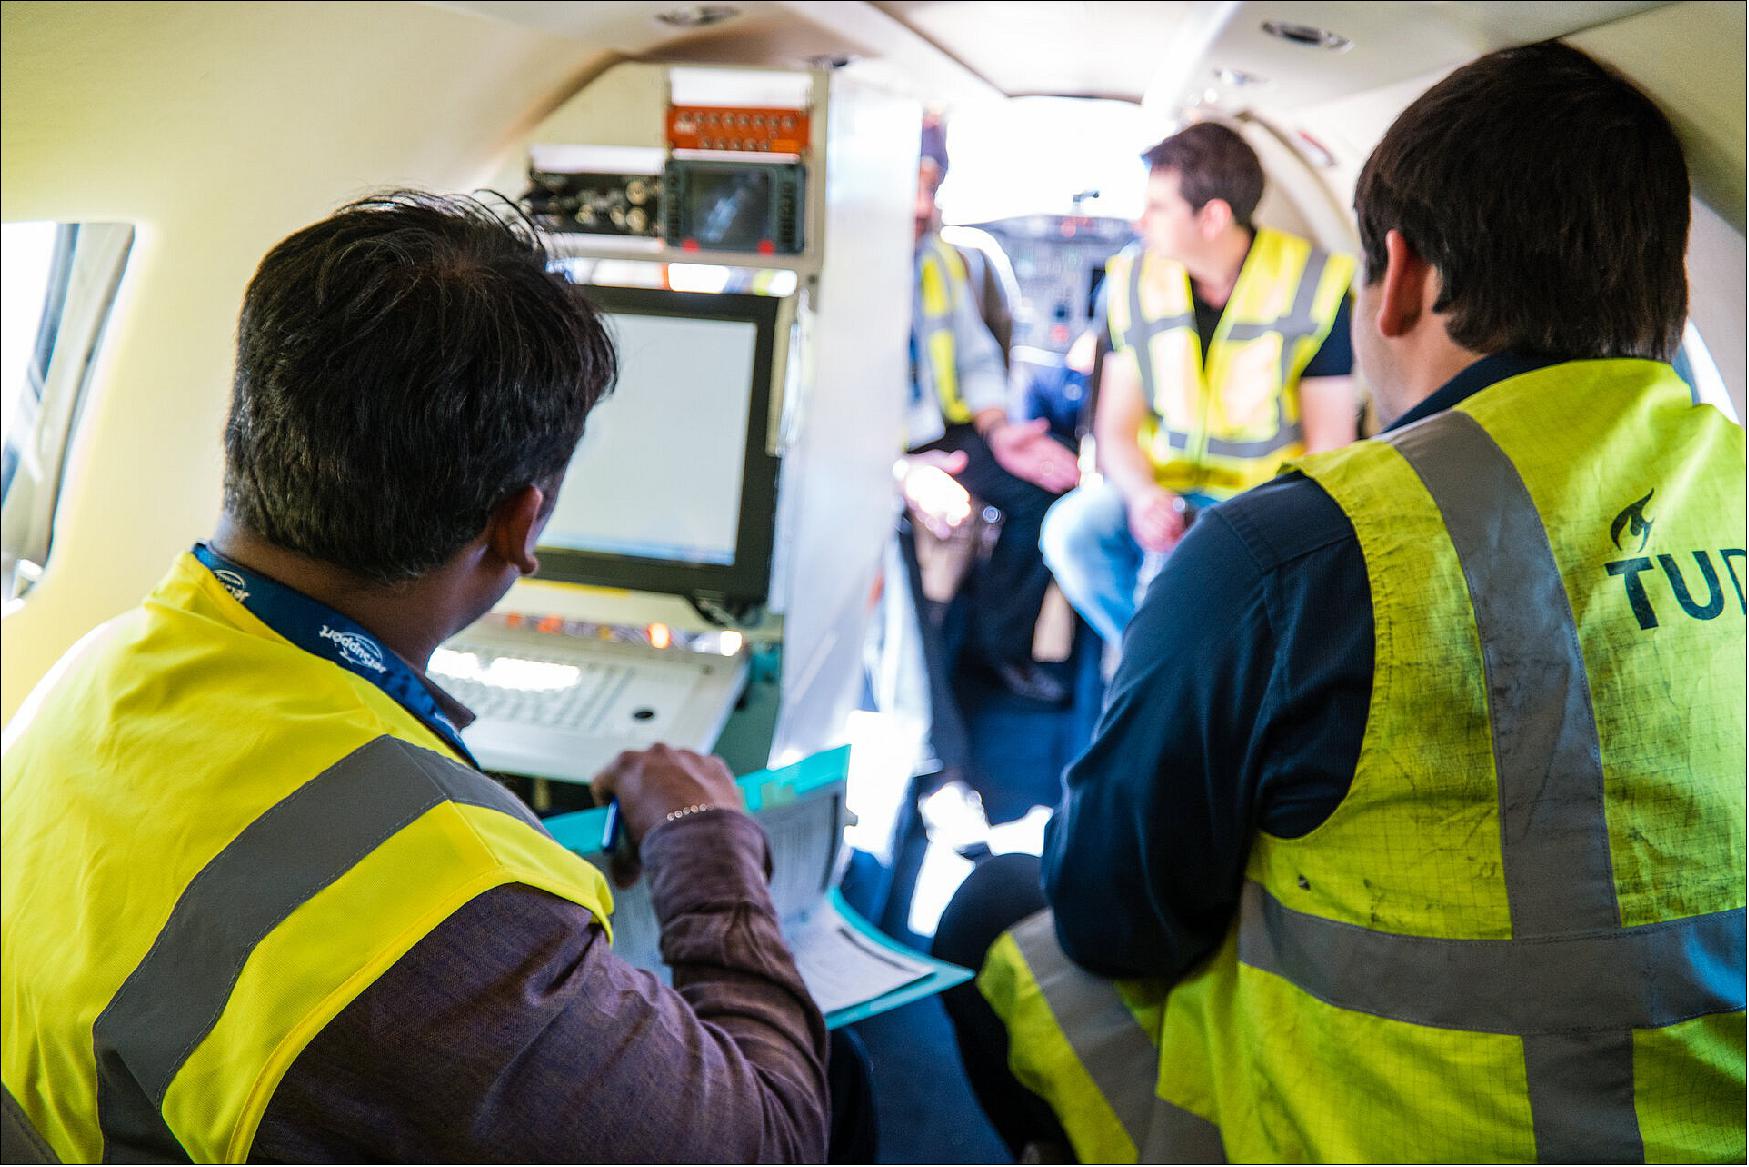 Figure 2: Iris flight trial. Engineers are shown testing Iris equipment to exchange messages in real-time with a flight control facility from a Cessna plane, which took off from Amsterdam Schiphol airport and flew over the Netherlands and the North Sea for three hours to test the system’s connection. Iris will provide a safe and secure text-based data link between pilots and air traffic control (ATC) networks using satellite technology. - The programme is developed under a public-private partnership between ESA and Inmarsat, and will help relieve pressure on the aviation sector's congested radio frequency communication channels. - It will so as part of the European Commission’s Single European Sky ATM Research (SESAR) masterplan to modernise Europe's air traffic management (image credit: ESA)